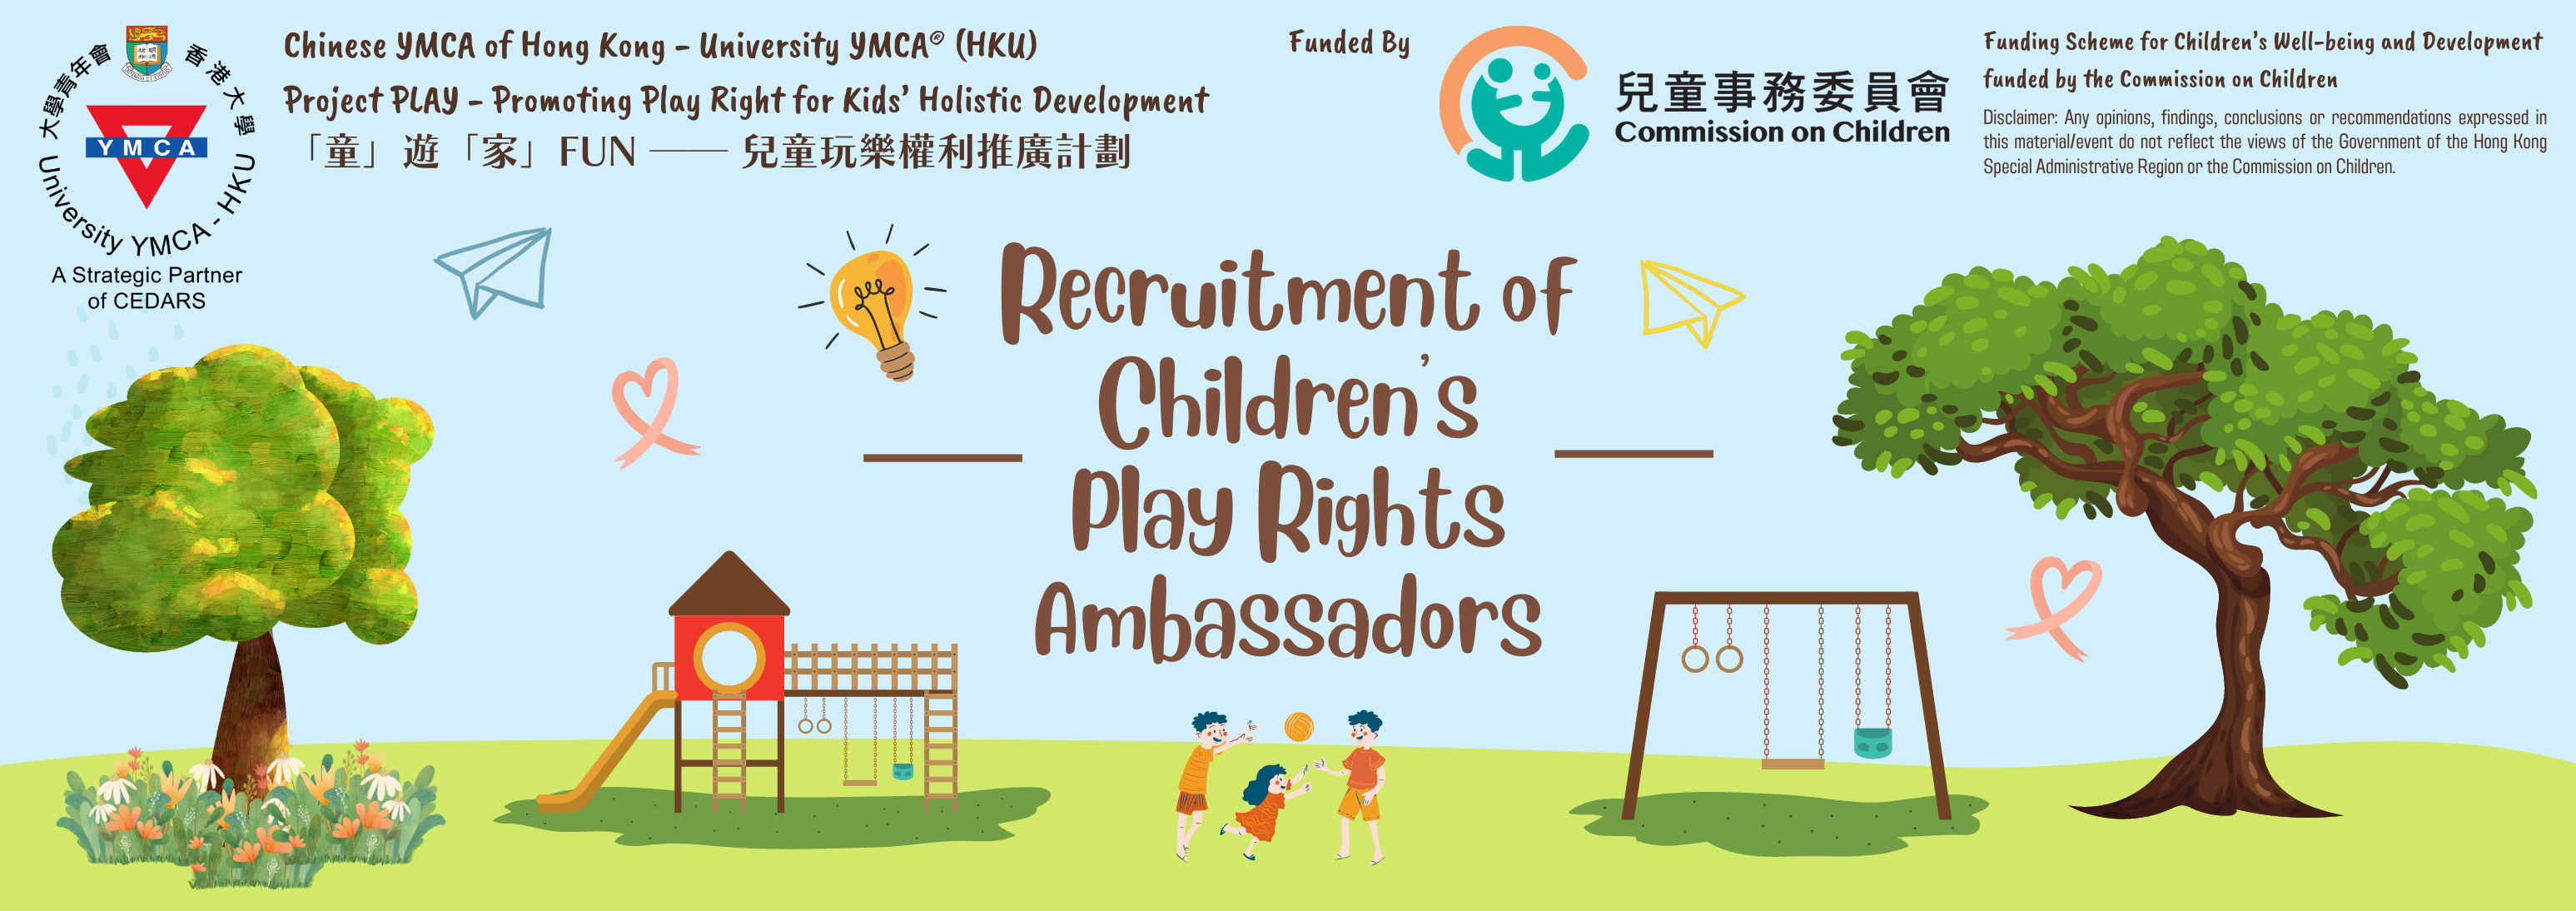 Project Play - Recruitment of Children's Play Rights Ambassadors